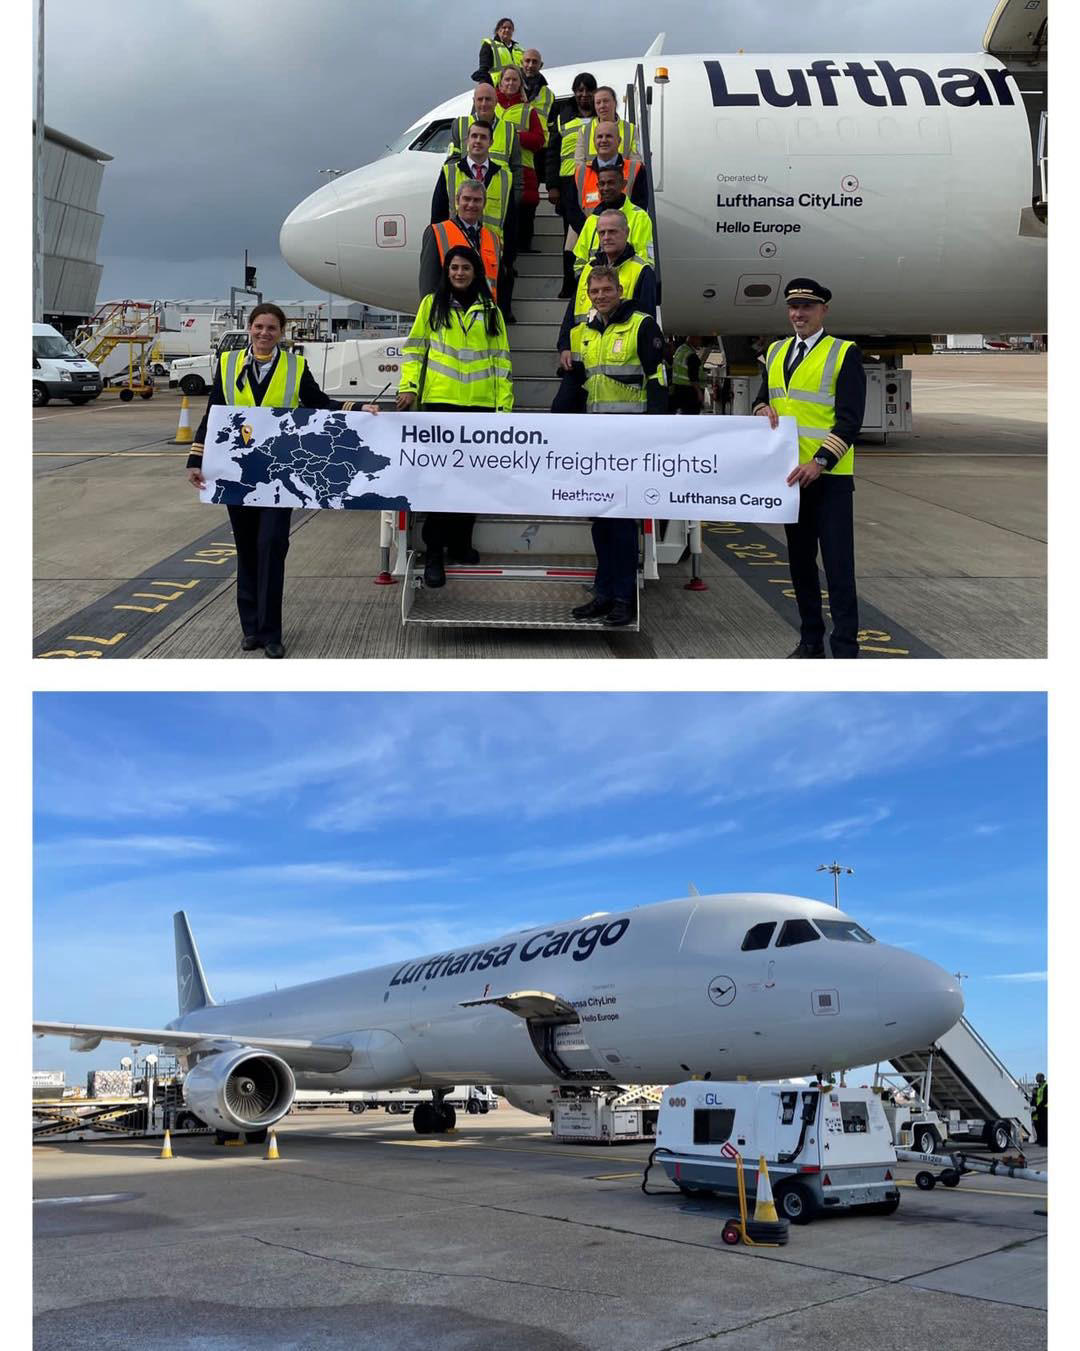 image  1 🇬🇧🇬🇧🇬🇧 #HelloLondon - Yesterday our #A321F had a warm welcome at Heathrow Airport in #London